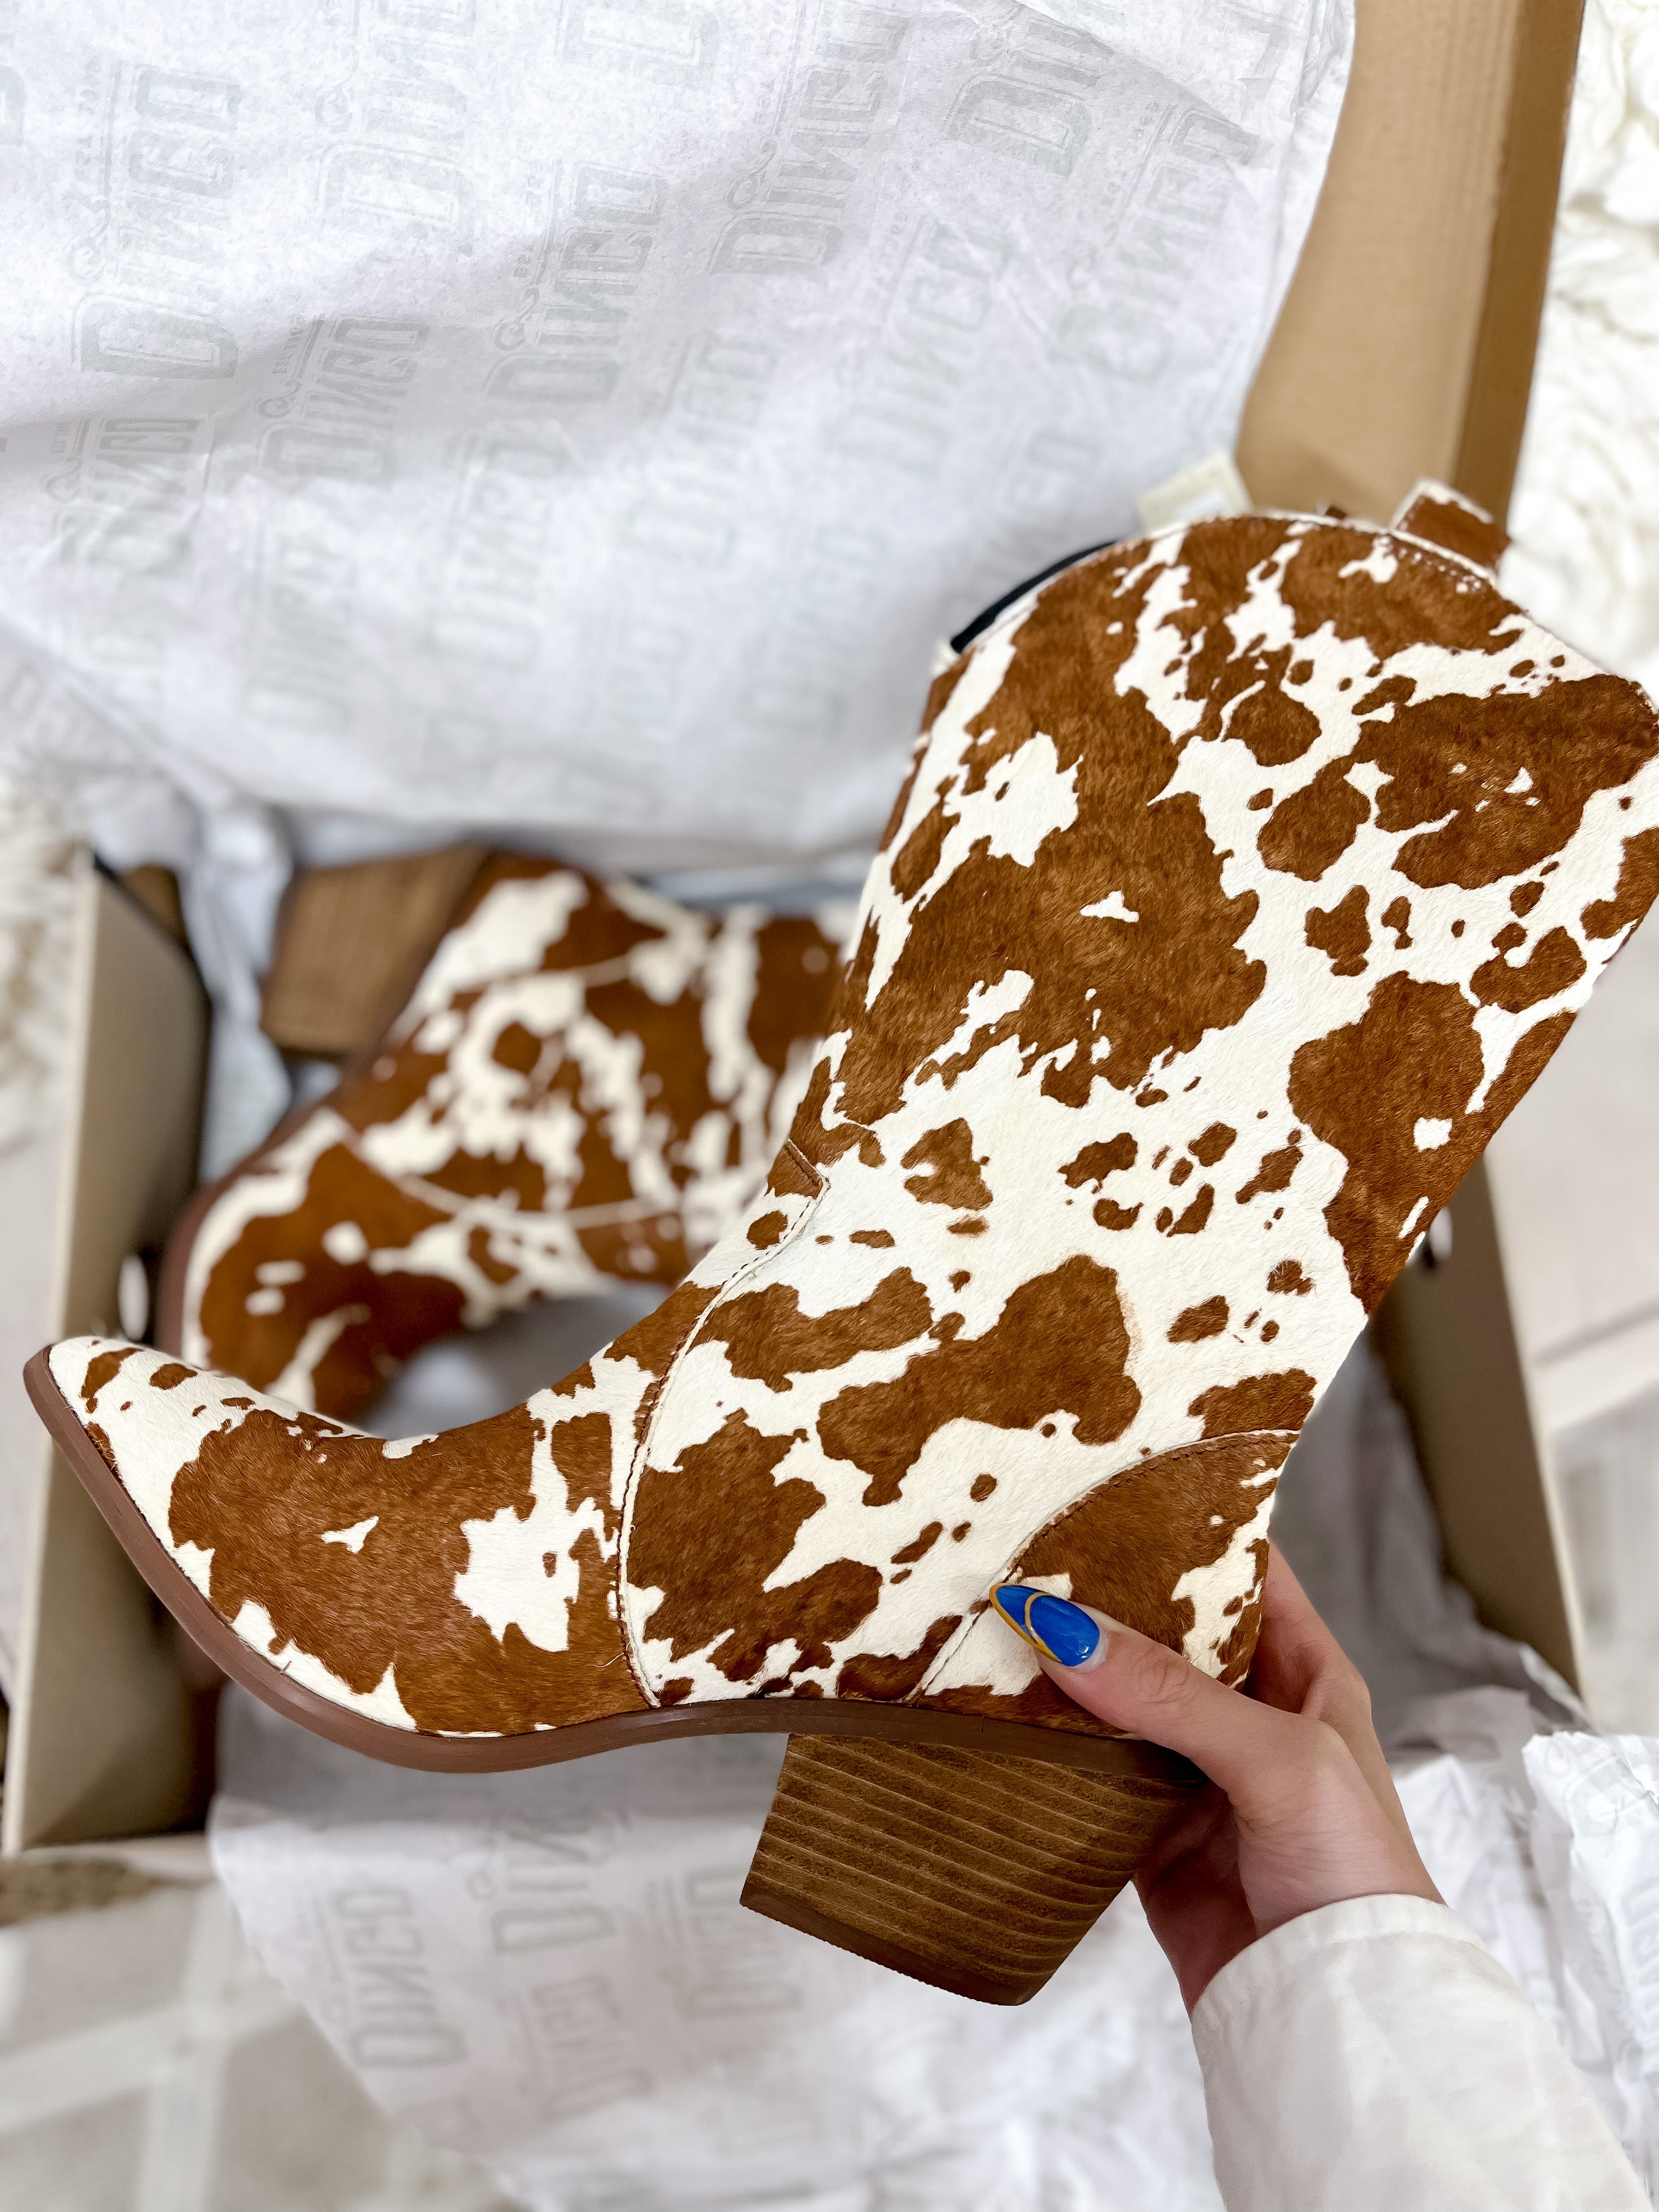 Online Exclusive | Dingo | Live a Little Hair on Hide Cowboy Boot in Brown **PREORDER - Giddy Up Glamour Boutique